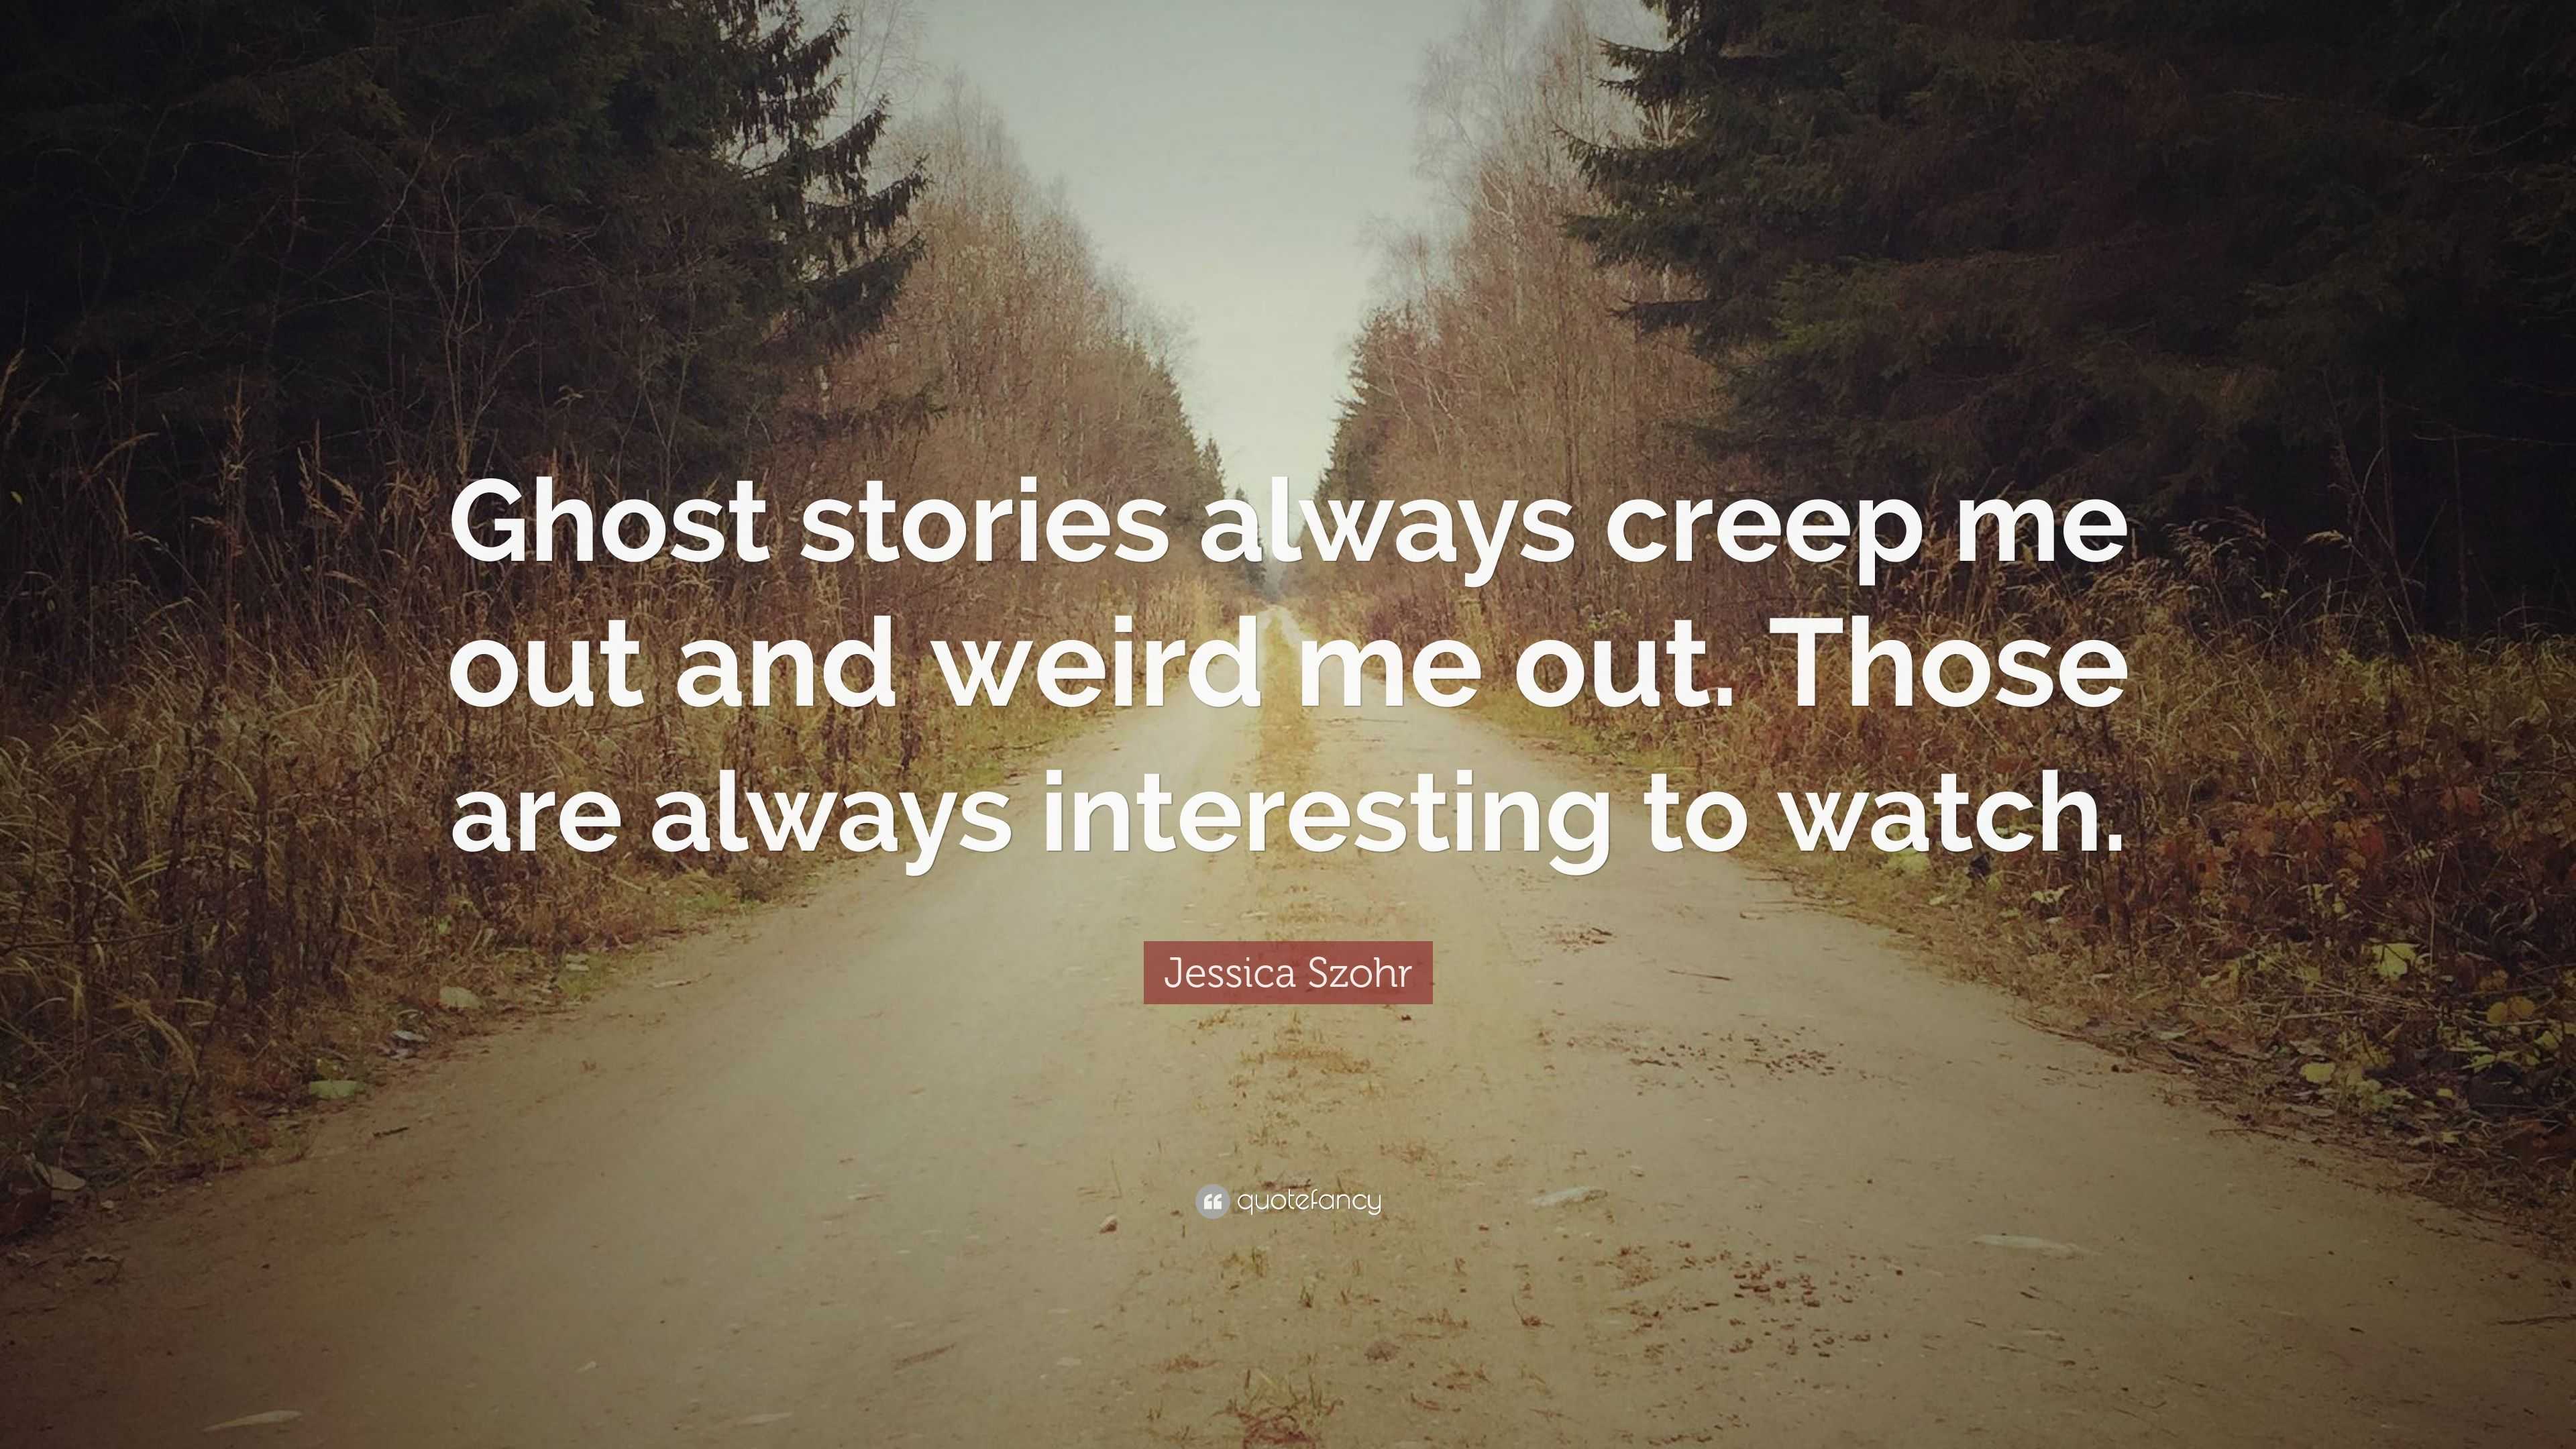 Jessica Szohr Quote: “Ghost stories always creep me out and weird me ...